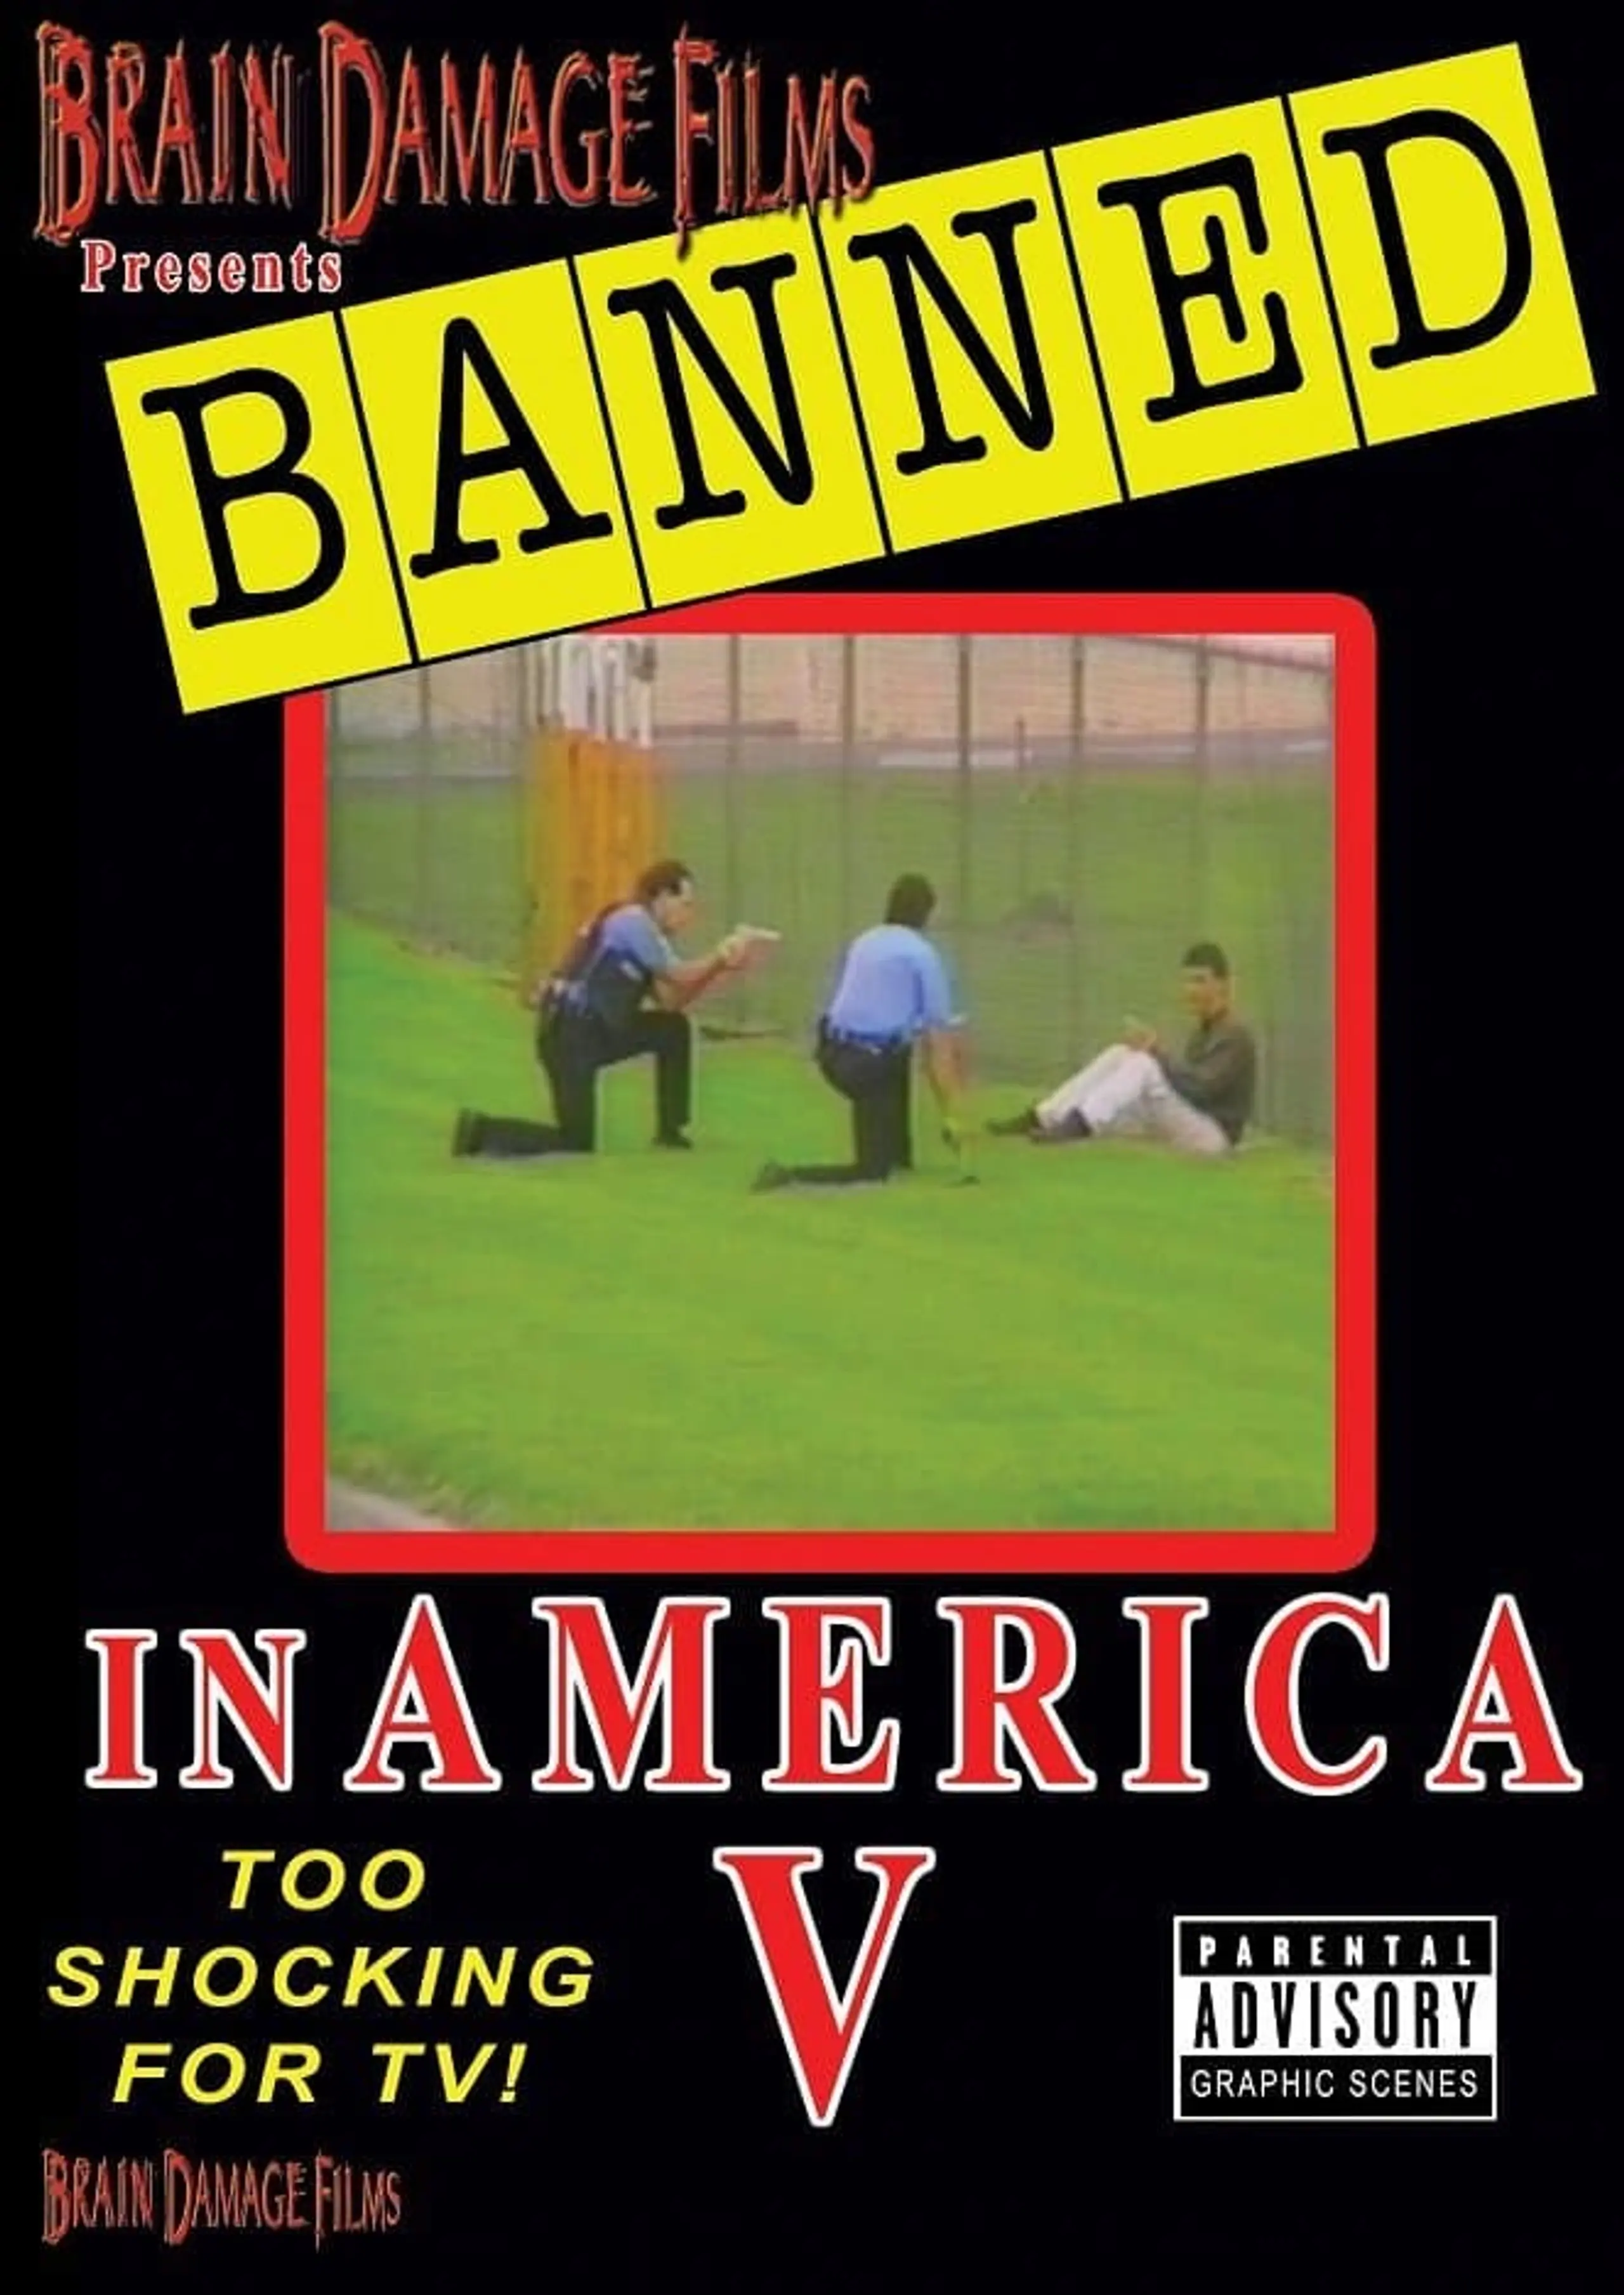 Banned! In America V - The Final Chapter